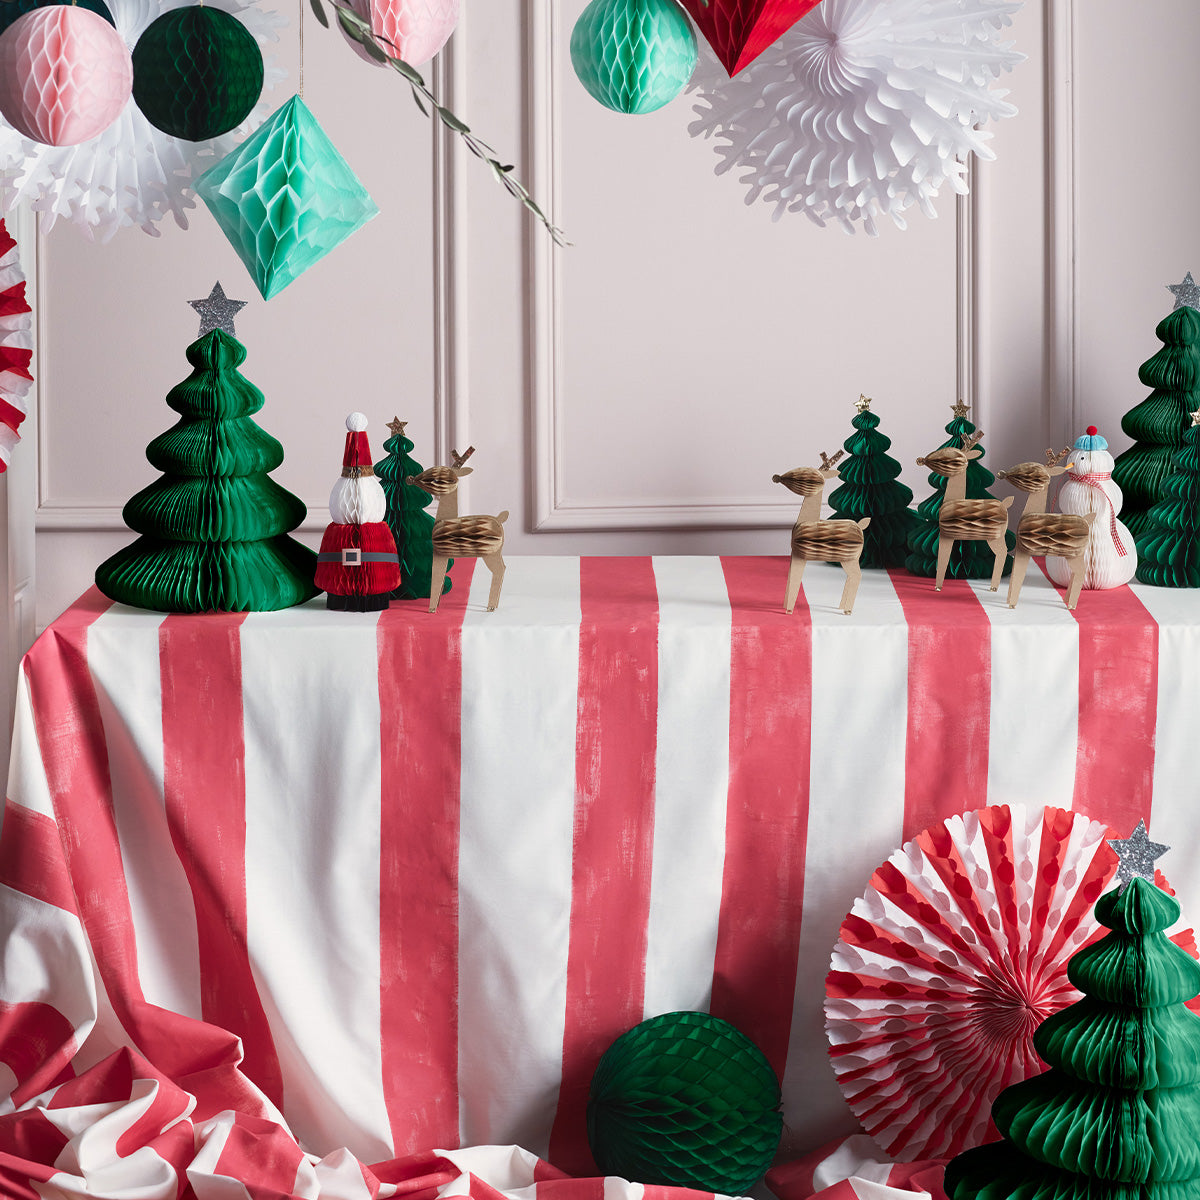 These Christmas tree honeycomb decorations are perfect as Christmas decor ideas.